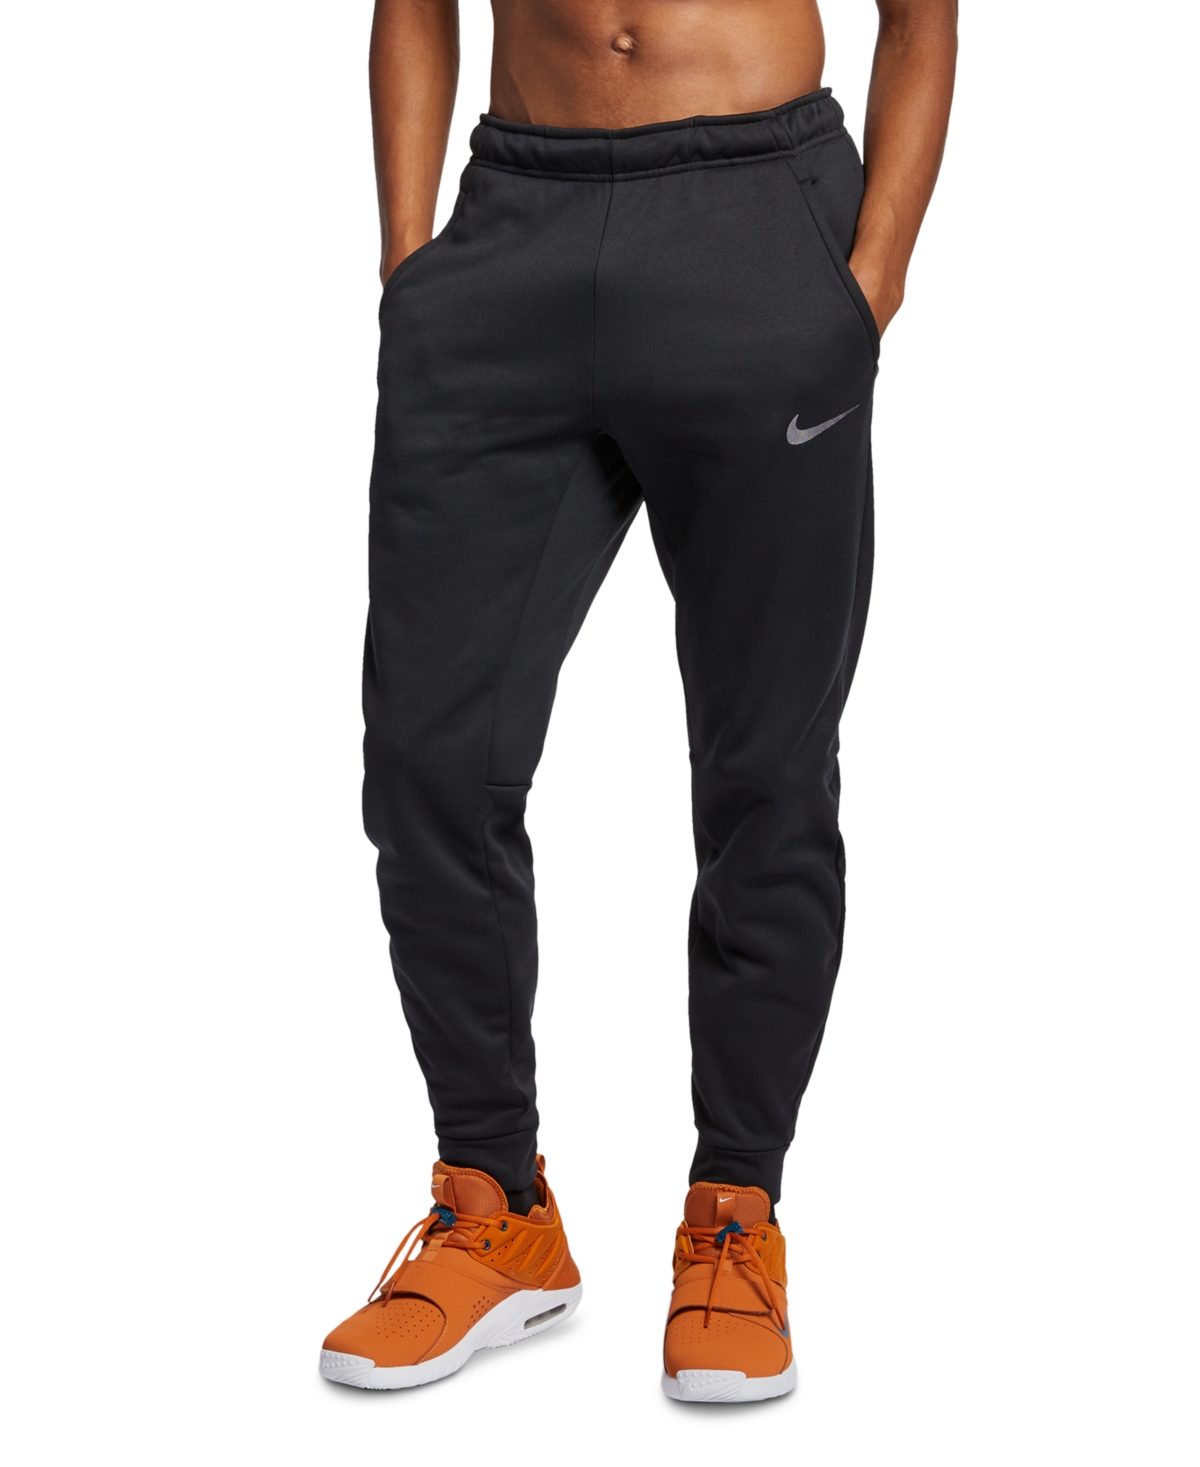 UPC 886668336145 product image for Nike Men's Therma Tapered Training Pants | upcitemdb.com